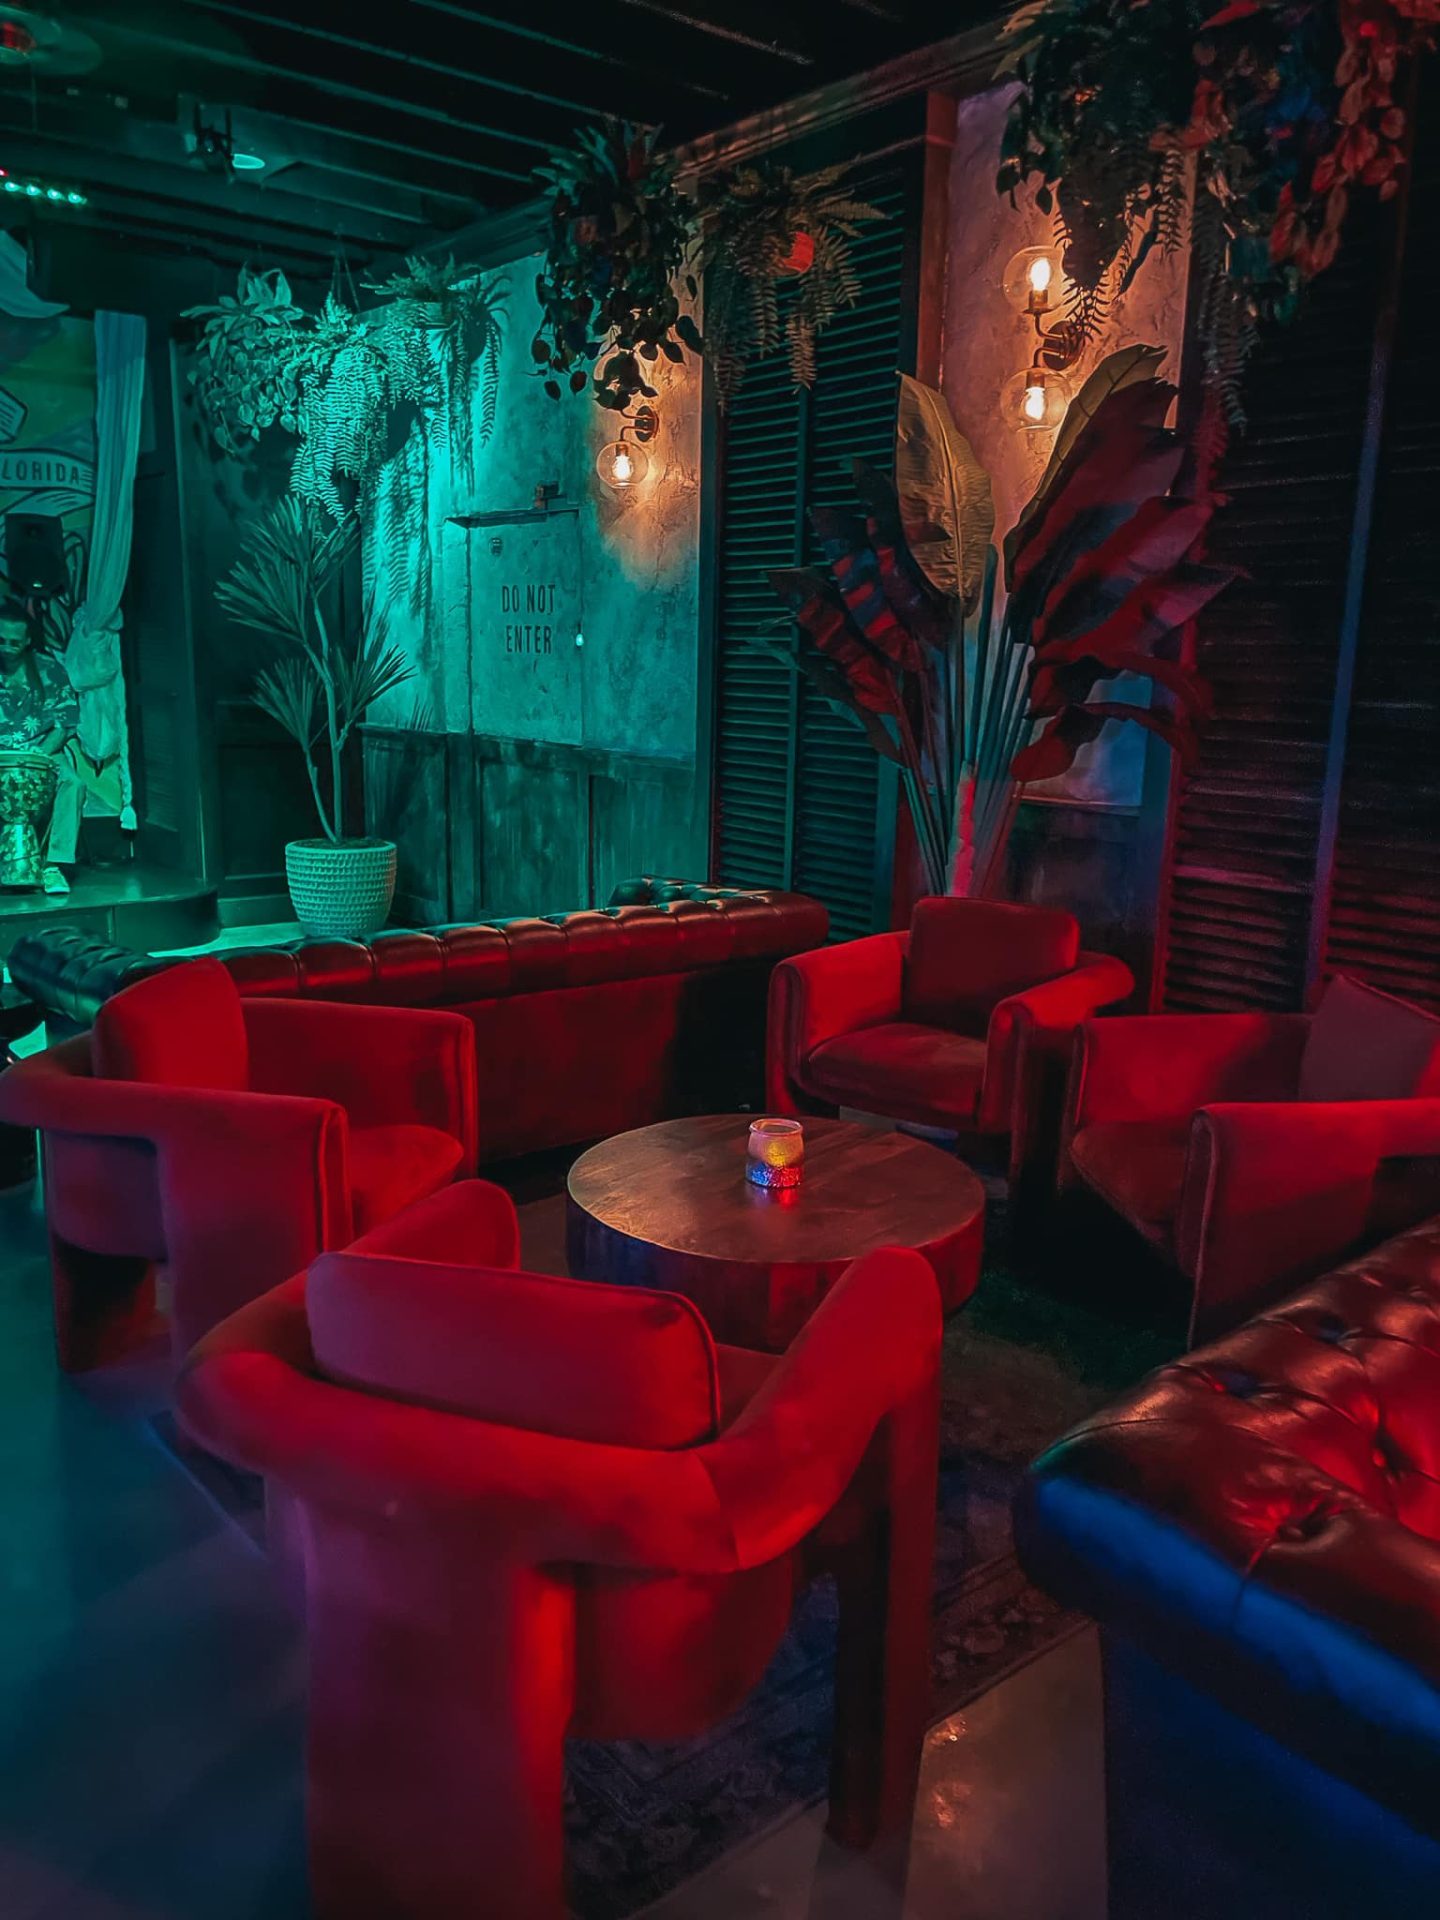 Seating area with intimate lighting at Dirty Laundry speakeasy